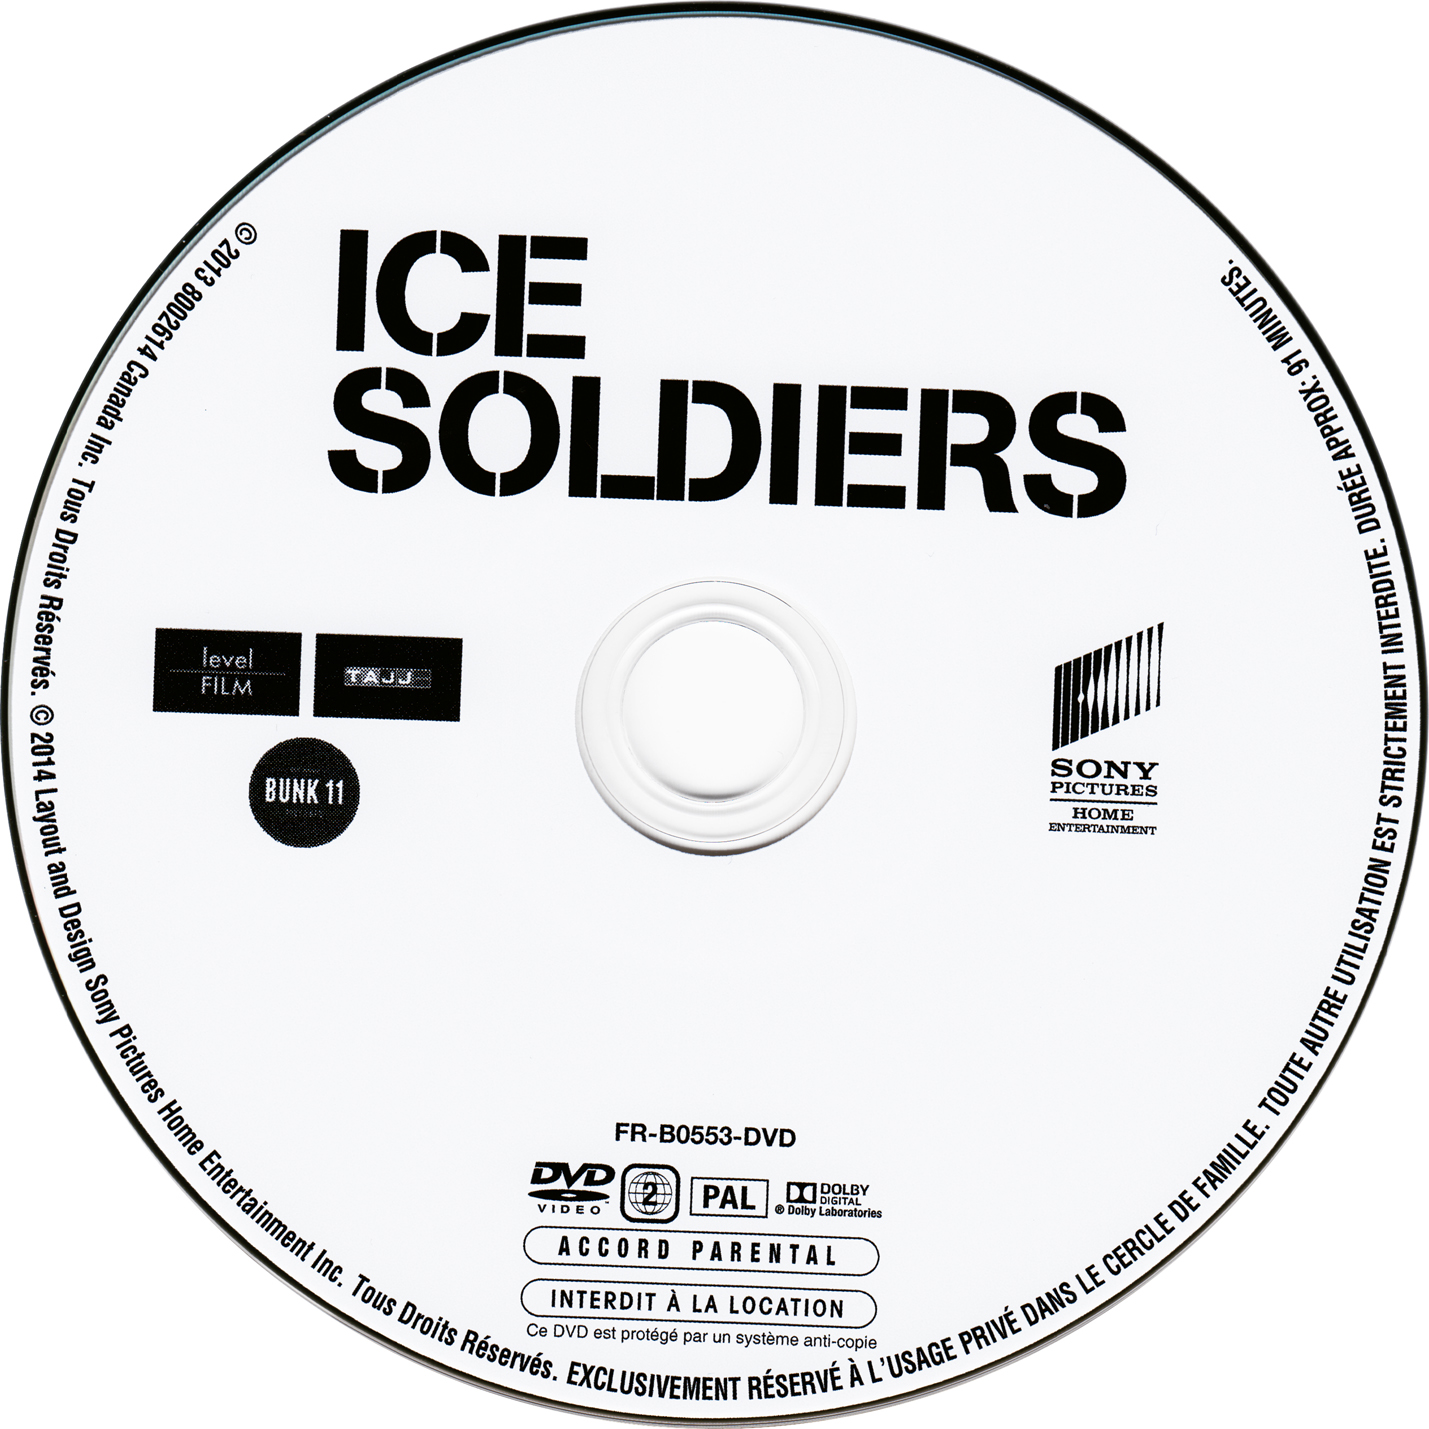 Ice soldiers